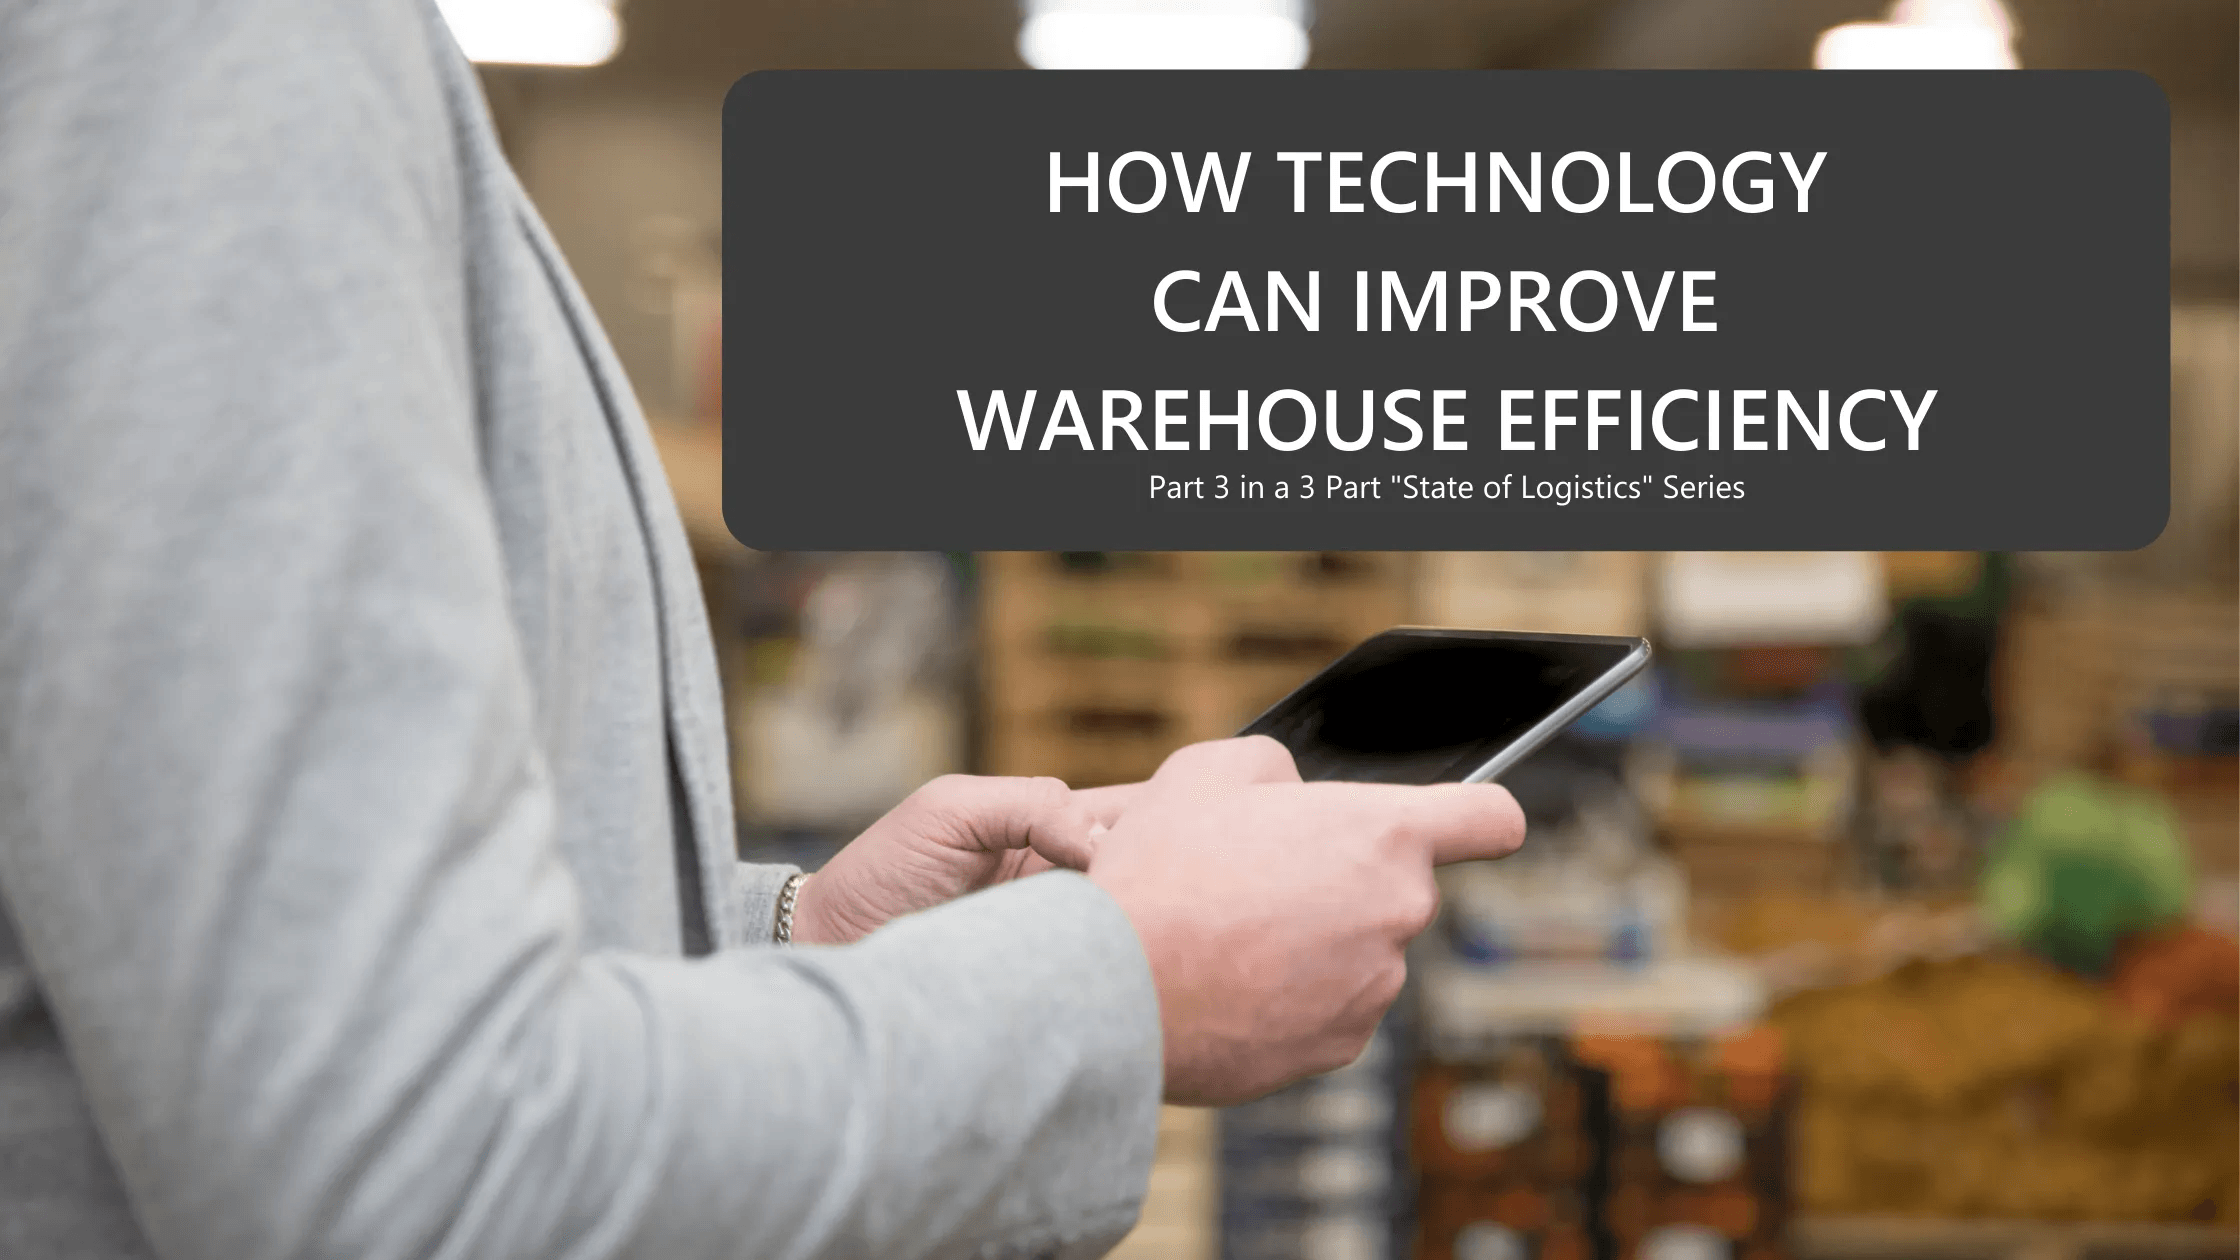 A person using a tablet with the title "How Technology Can Improve Warehouse Efficiency"